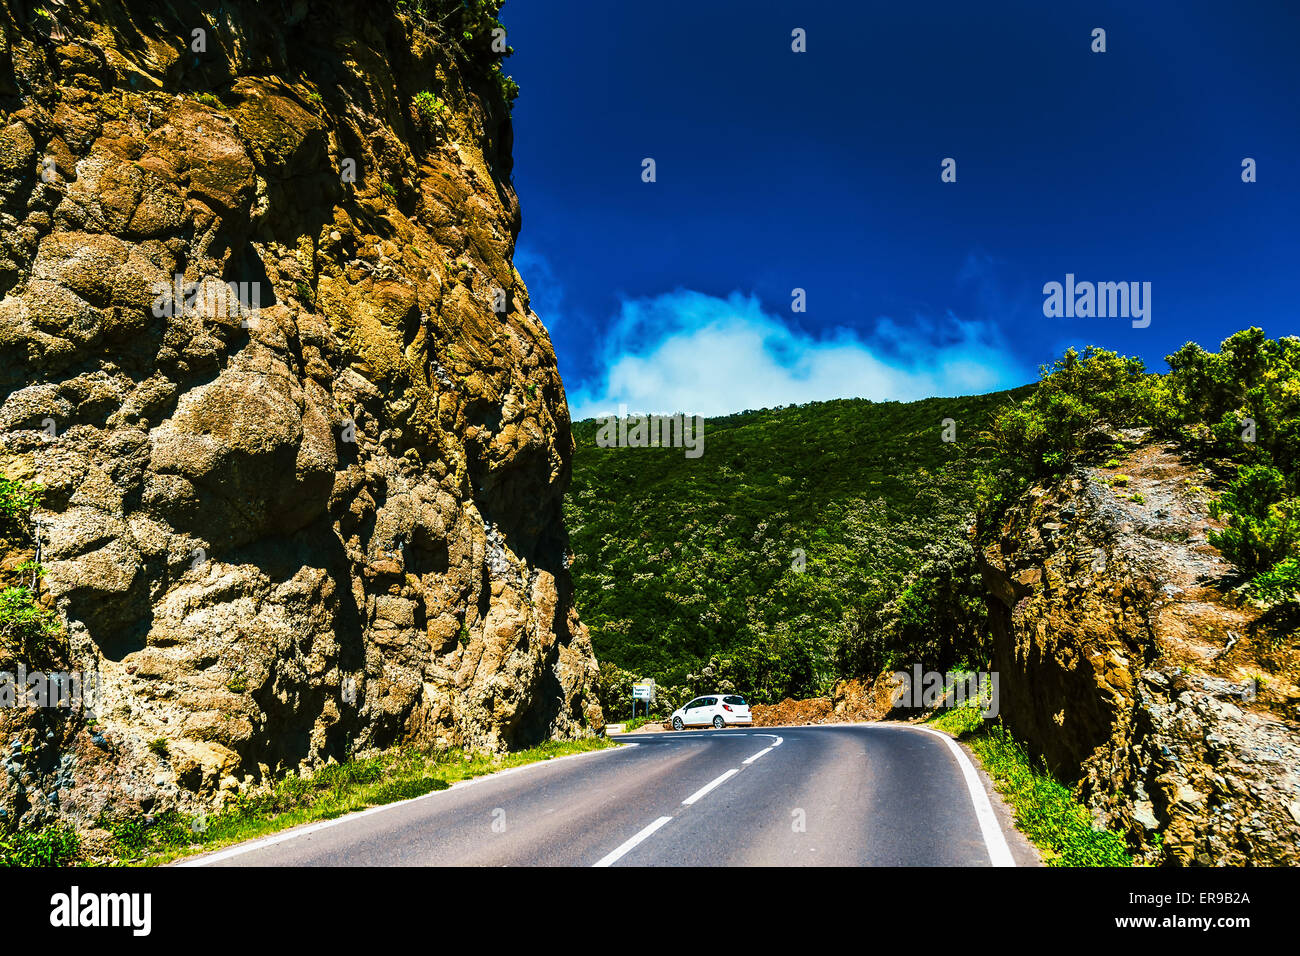 Asphalt road in green mountains with blue sky and clouds in Tenerife Canary island, Spain at spring or summer Stock Photo